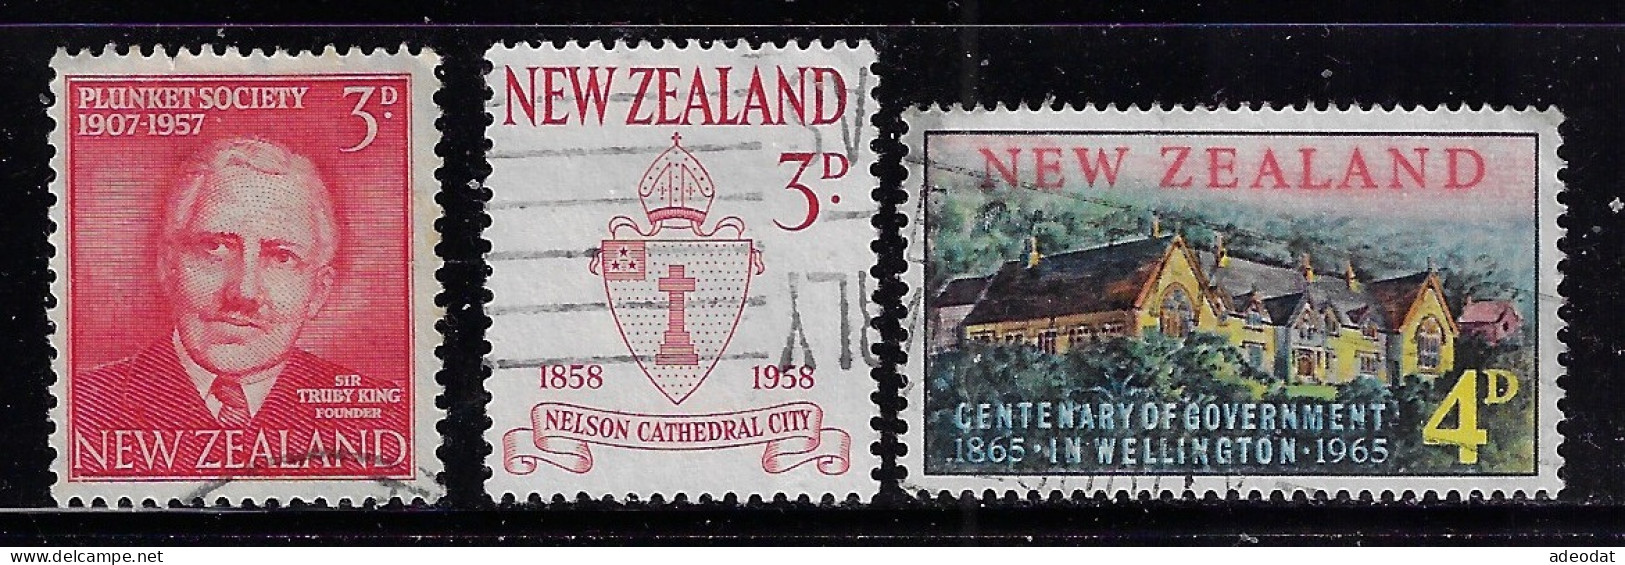 NEW ZEALAND 1957,1958,1965 SCOTT #318,322,372 USED - Used Stamps